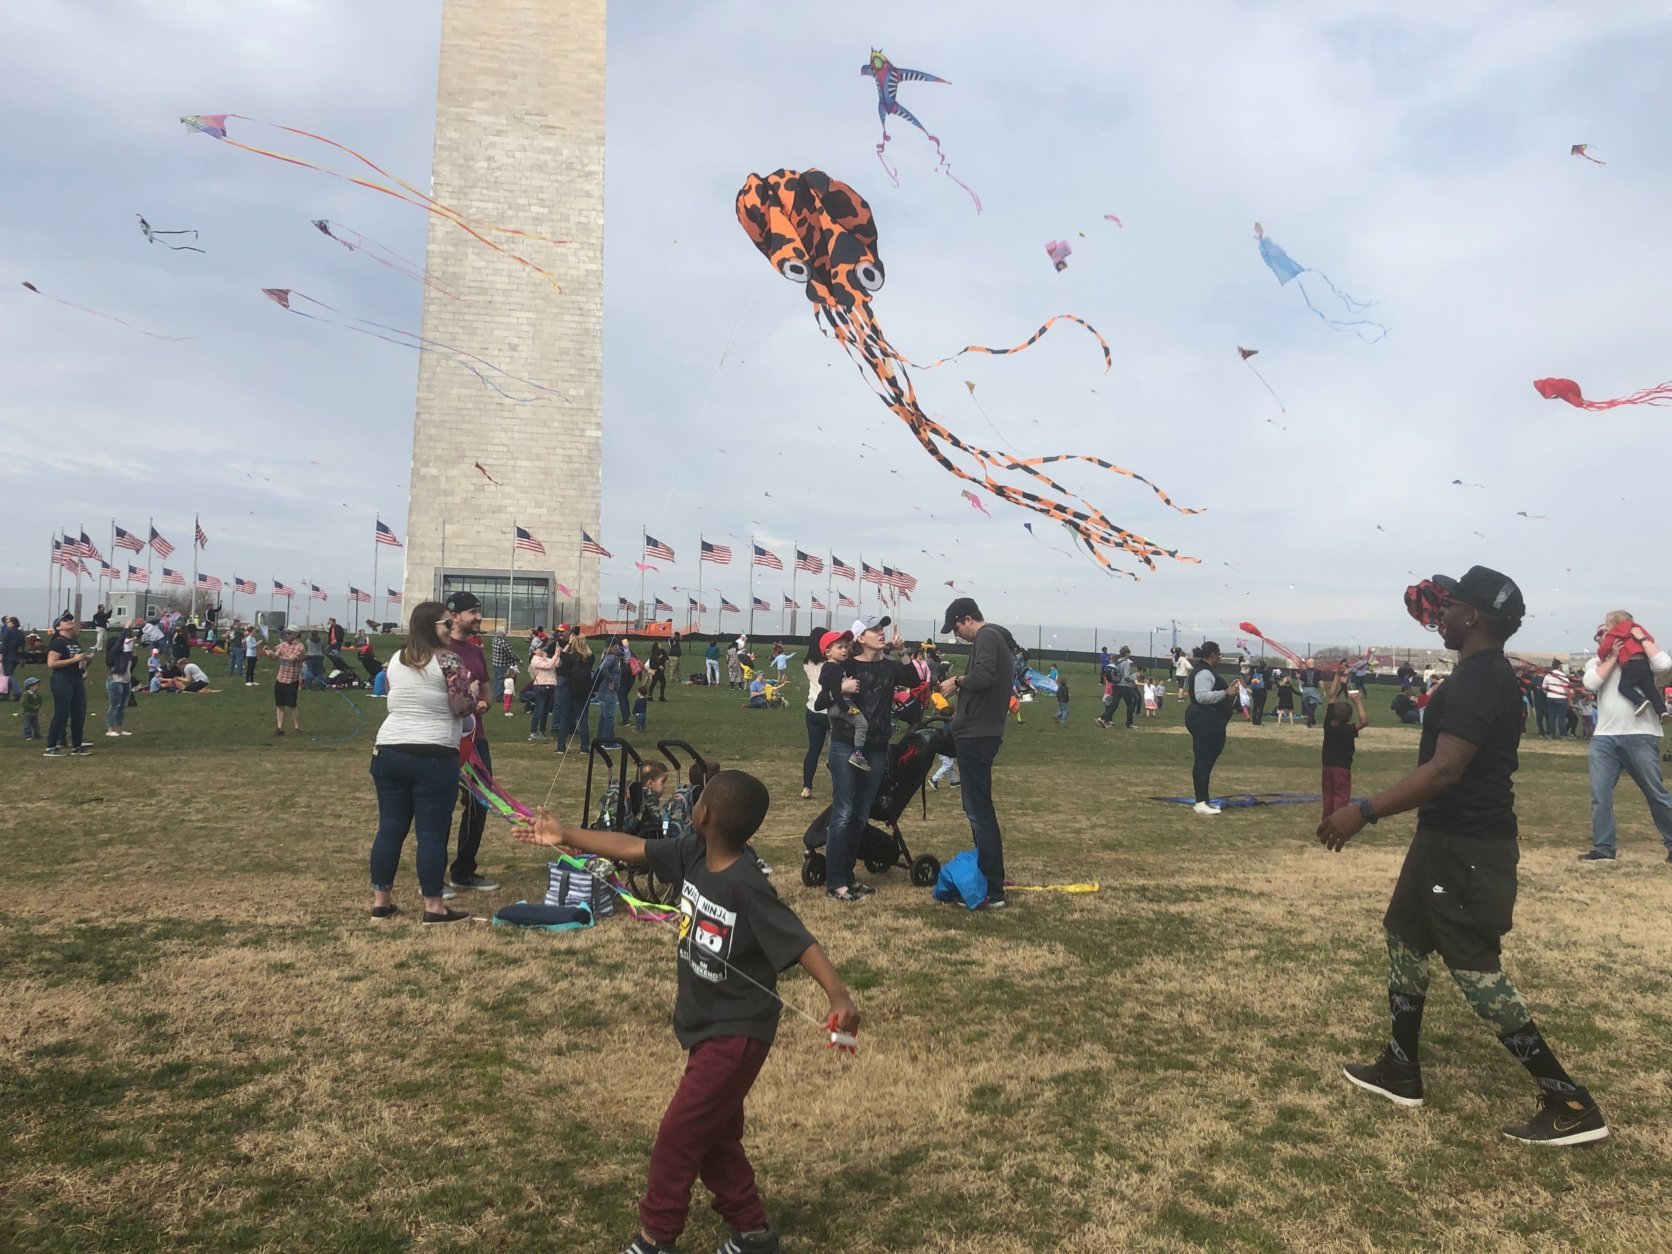 Visitors and D.C. locals alike fly kites and take in the sites of the cherry blossoms in front of the Washington Monument.(WTOP/Melissa Howell)